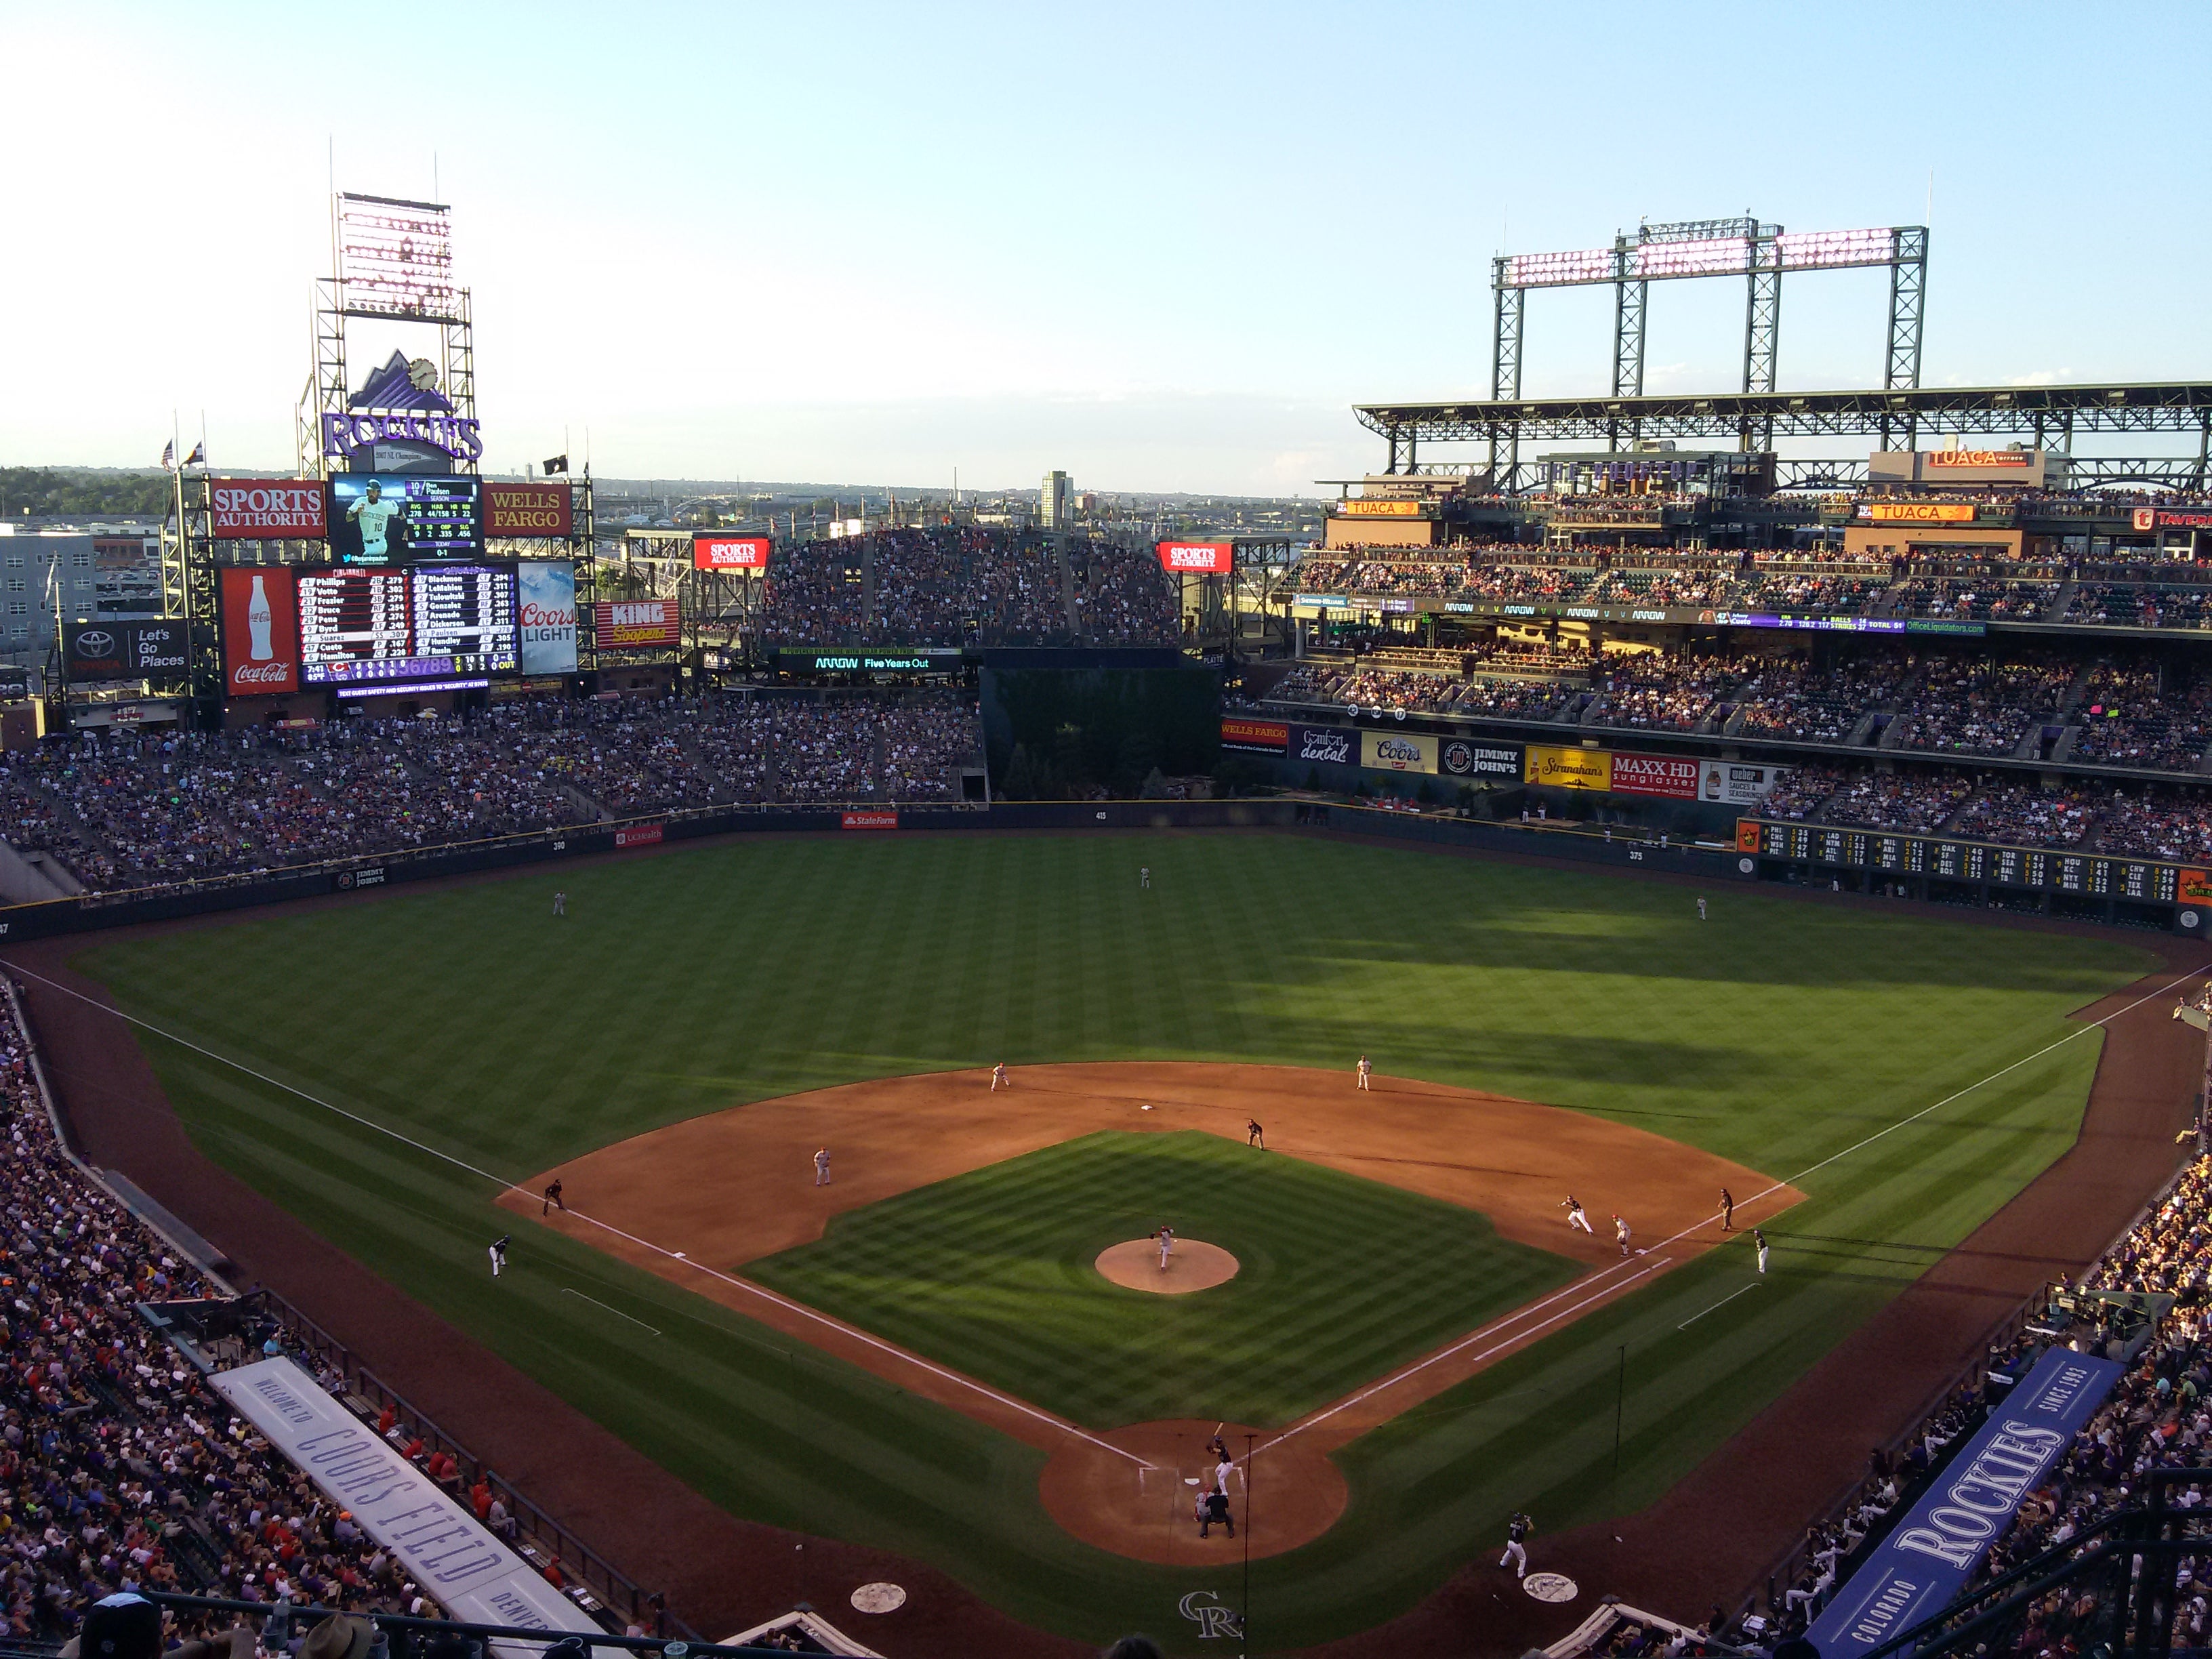 Coors Field Seating Chart Pdf